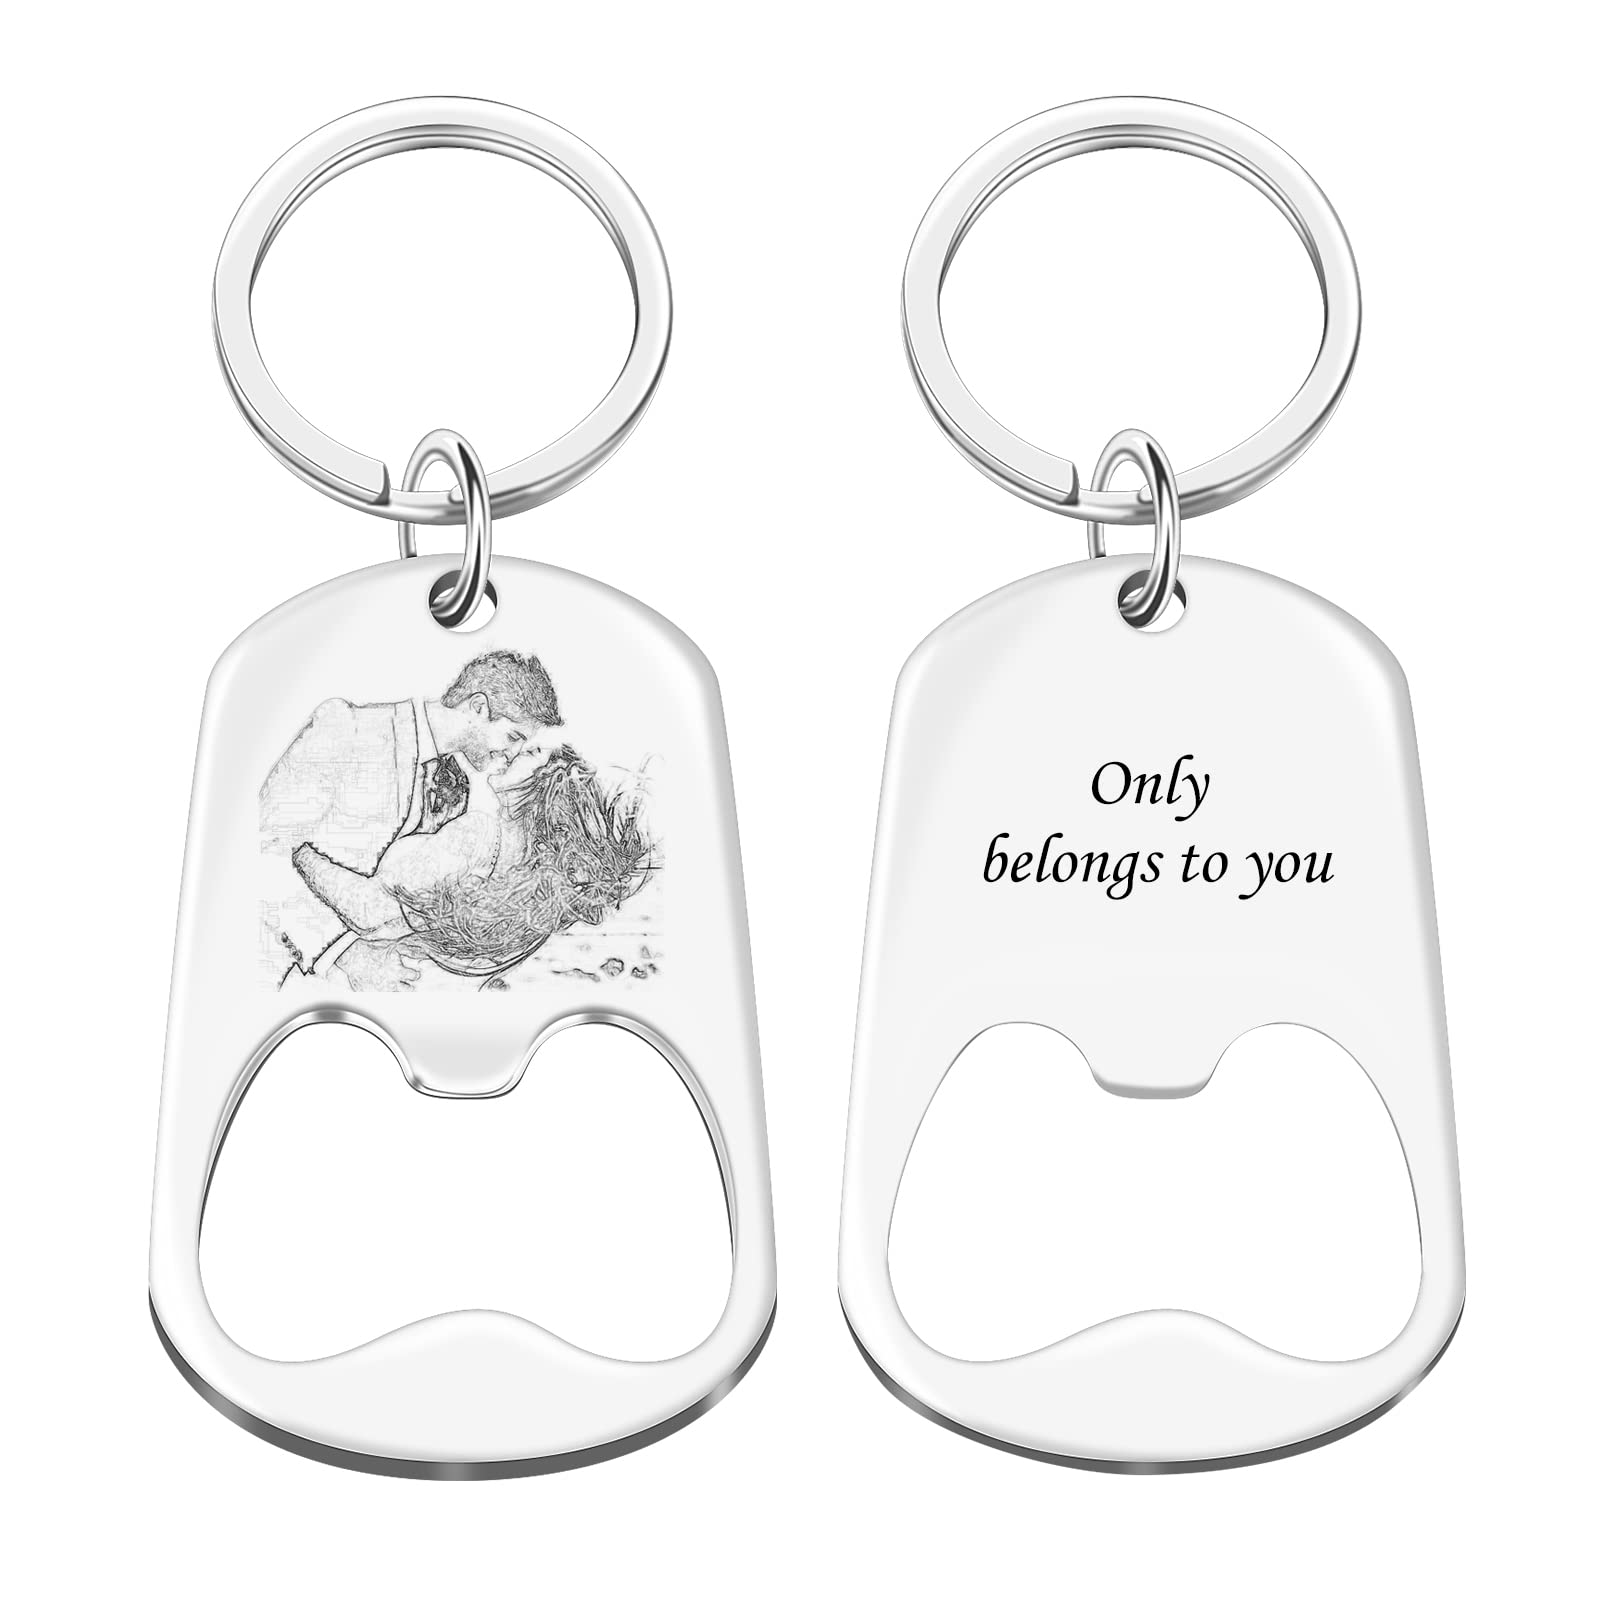 Custom Bottle Opener Shaped Keychain with Photo and Engraving Text 